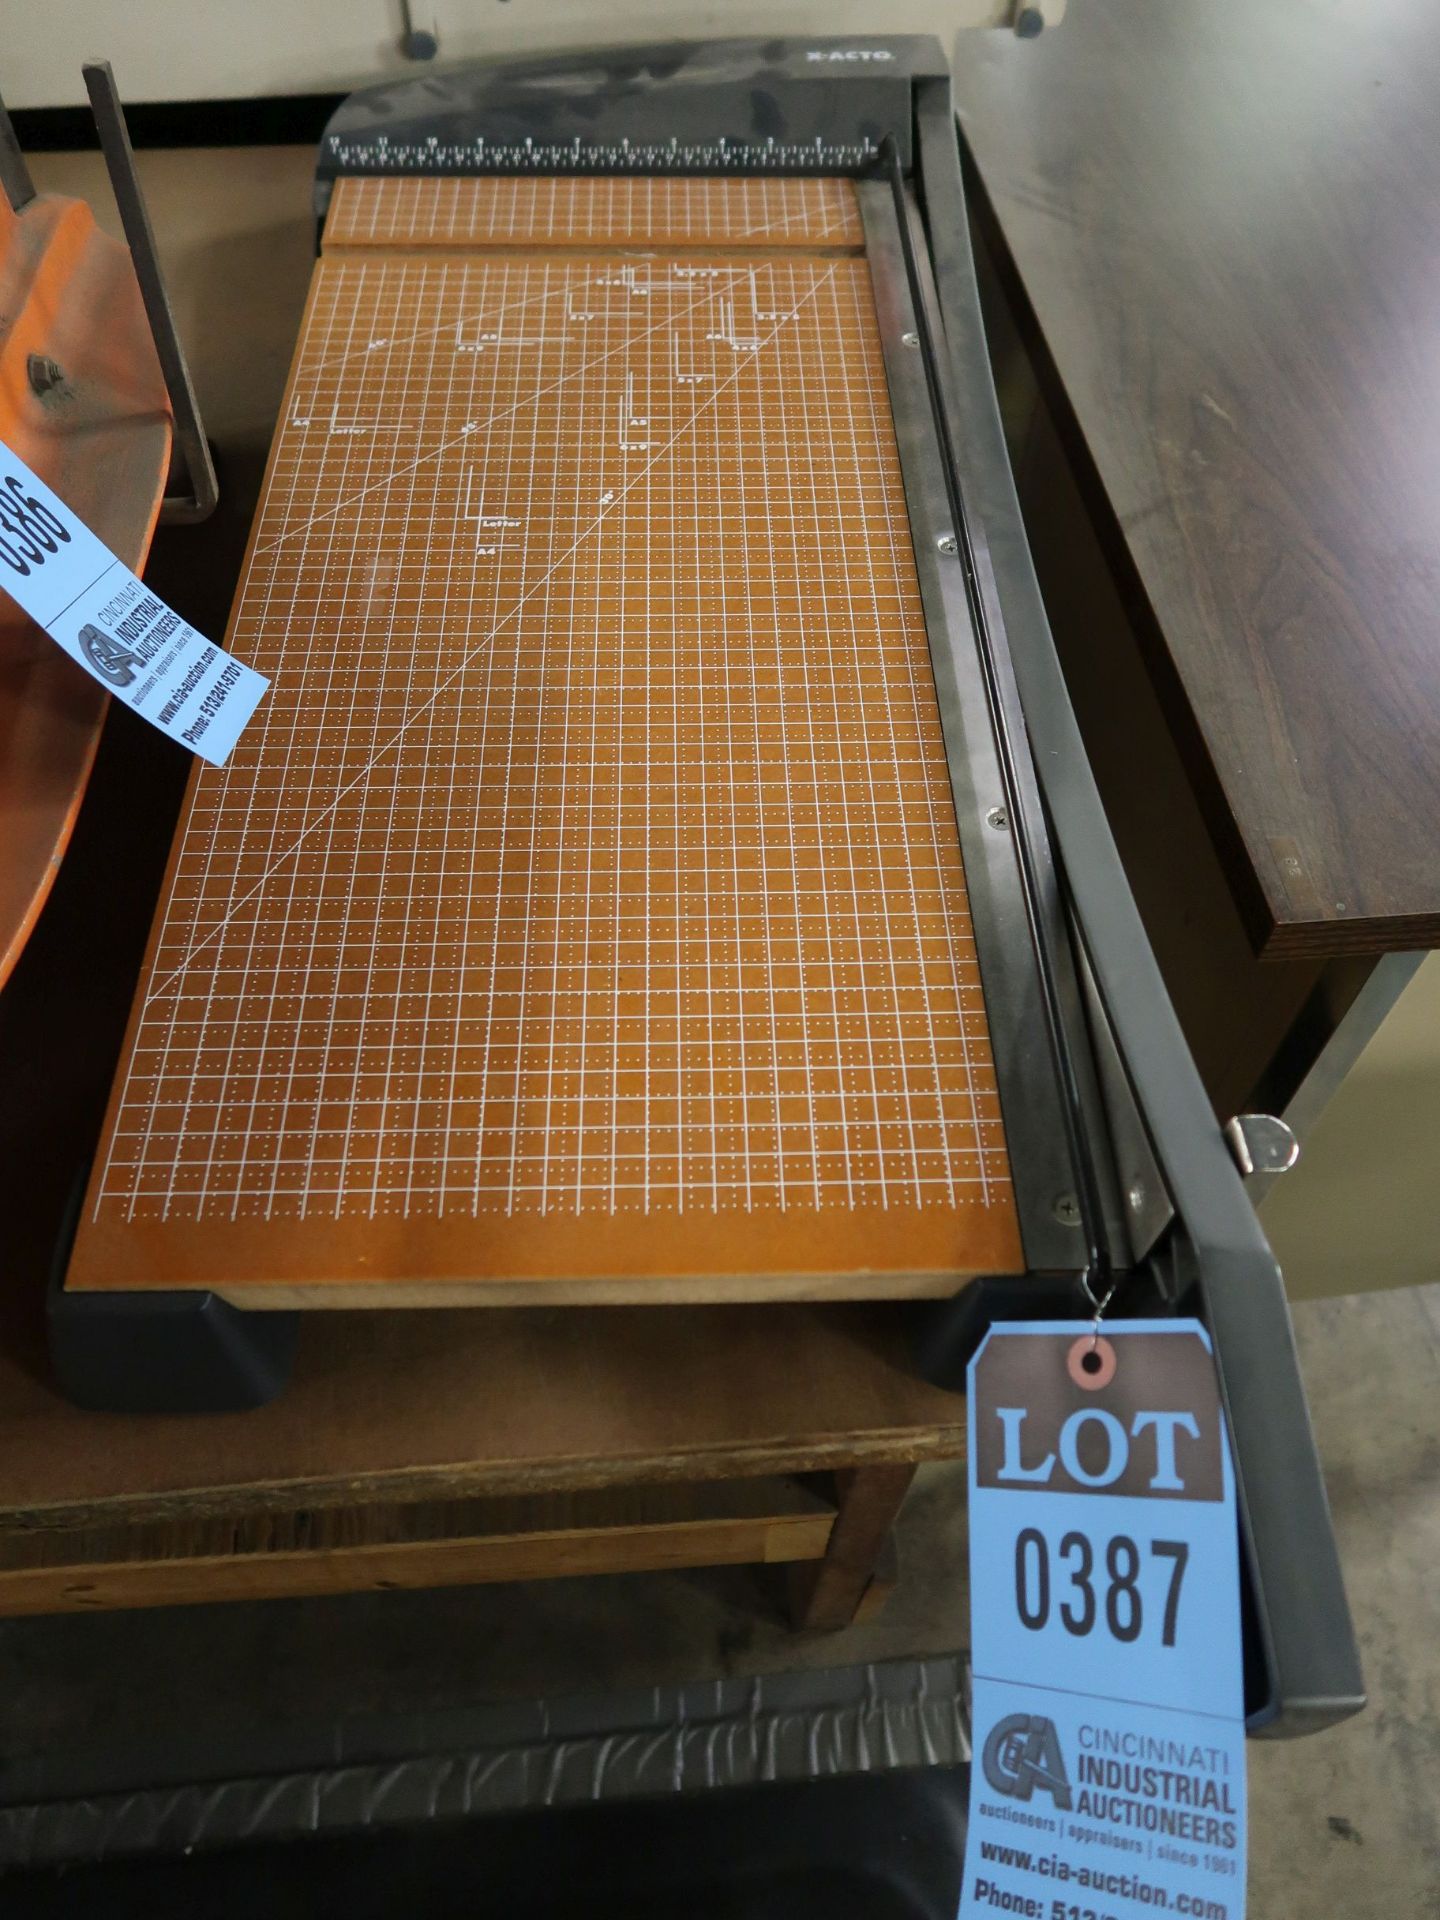 24" X-ACTO PAPER CUTTER